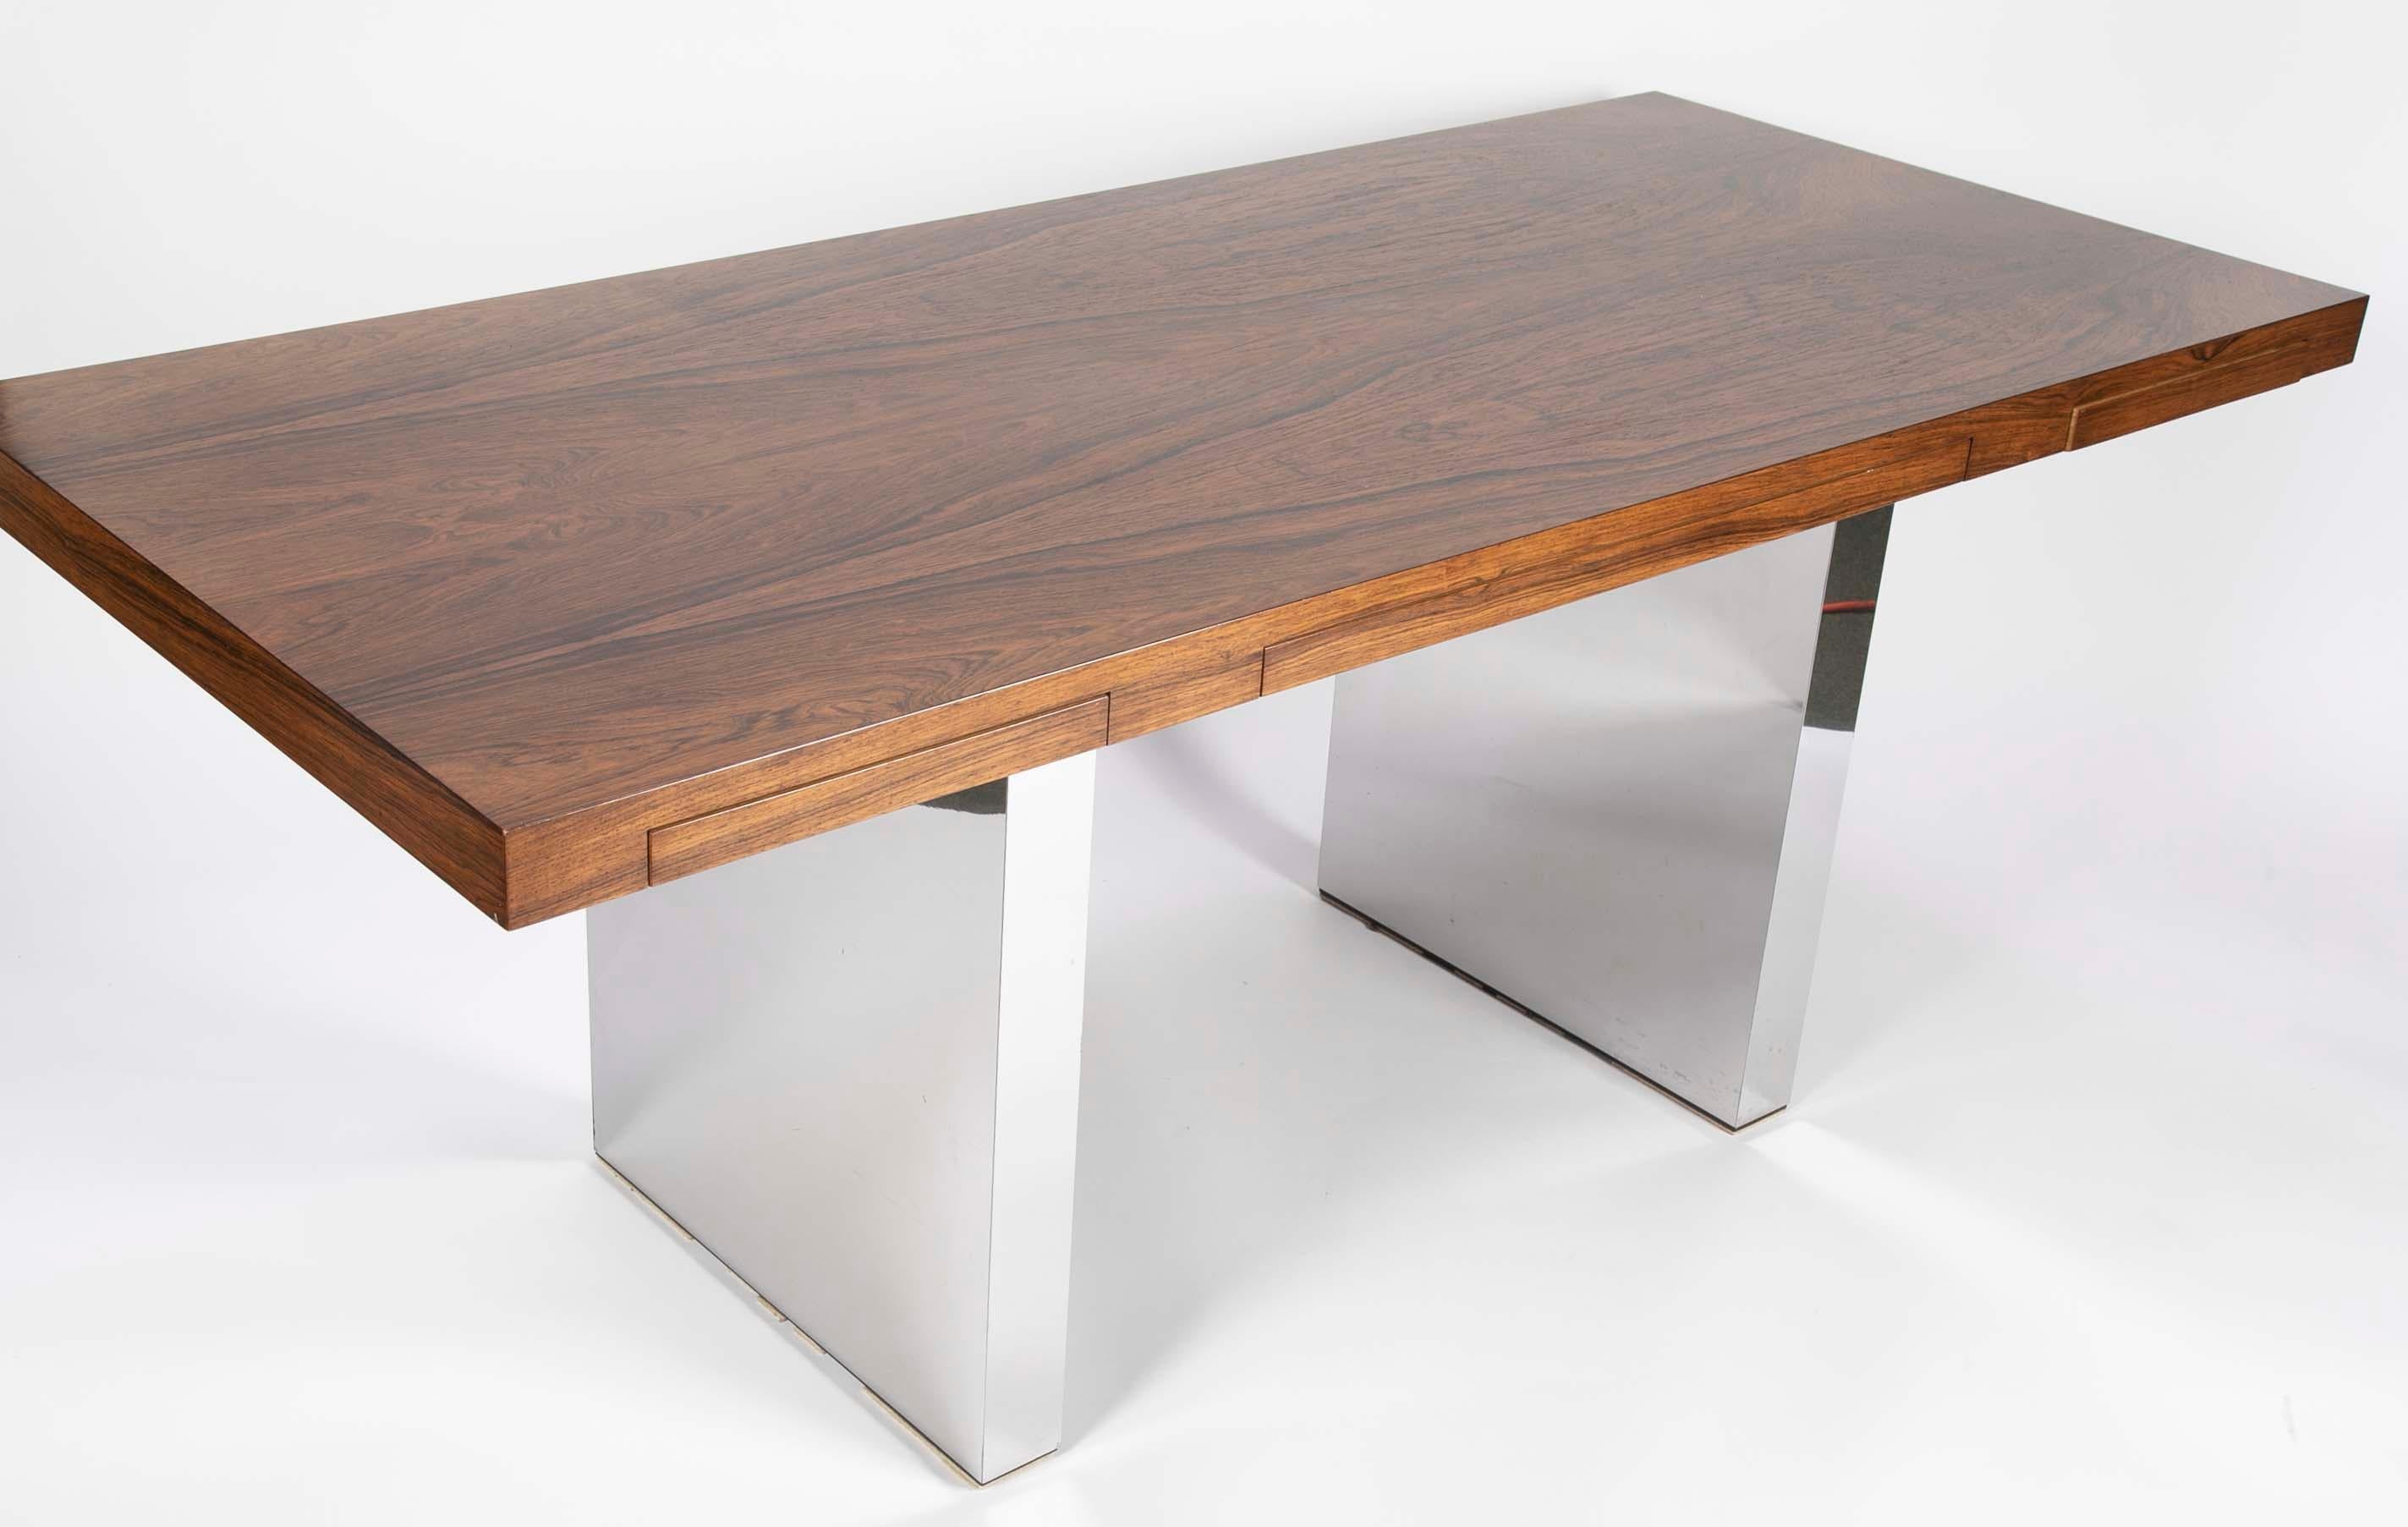 A sleek rosewood desk with three minimal drawers that disappear into the apron. The drawers a constructed of white oak. A Dunbar metal tag is inside the left drawer. Chrome legs in perfect condition with no dents. Designed by Roger Sprunger in 1965.